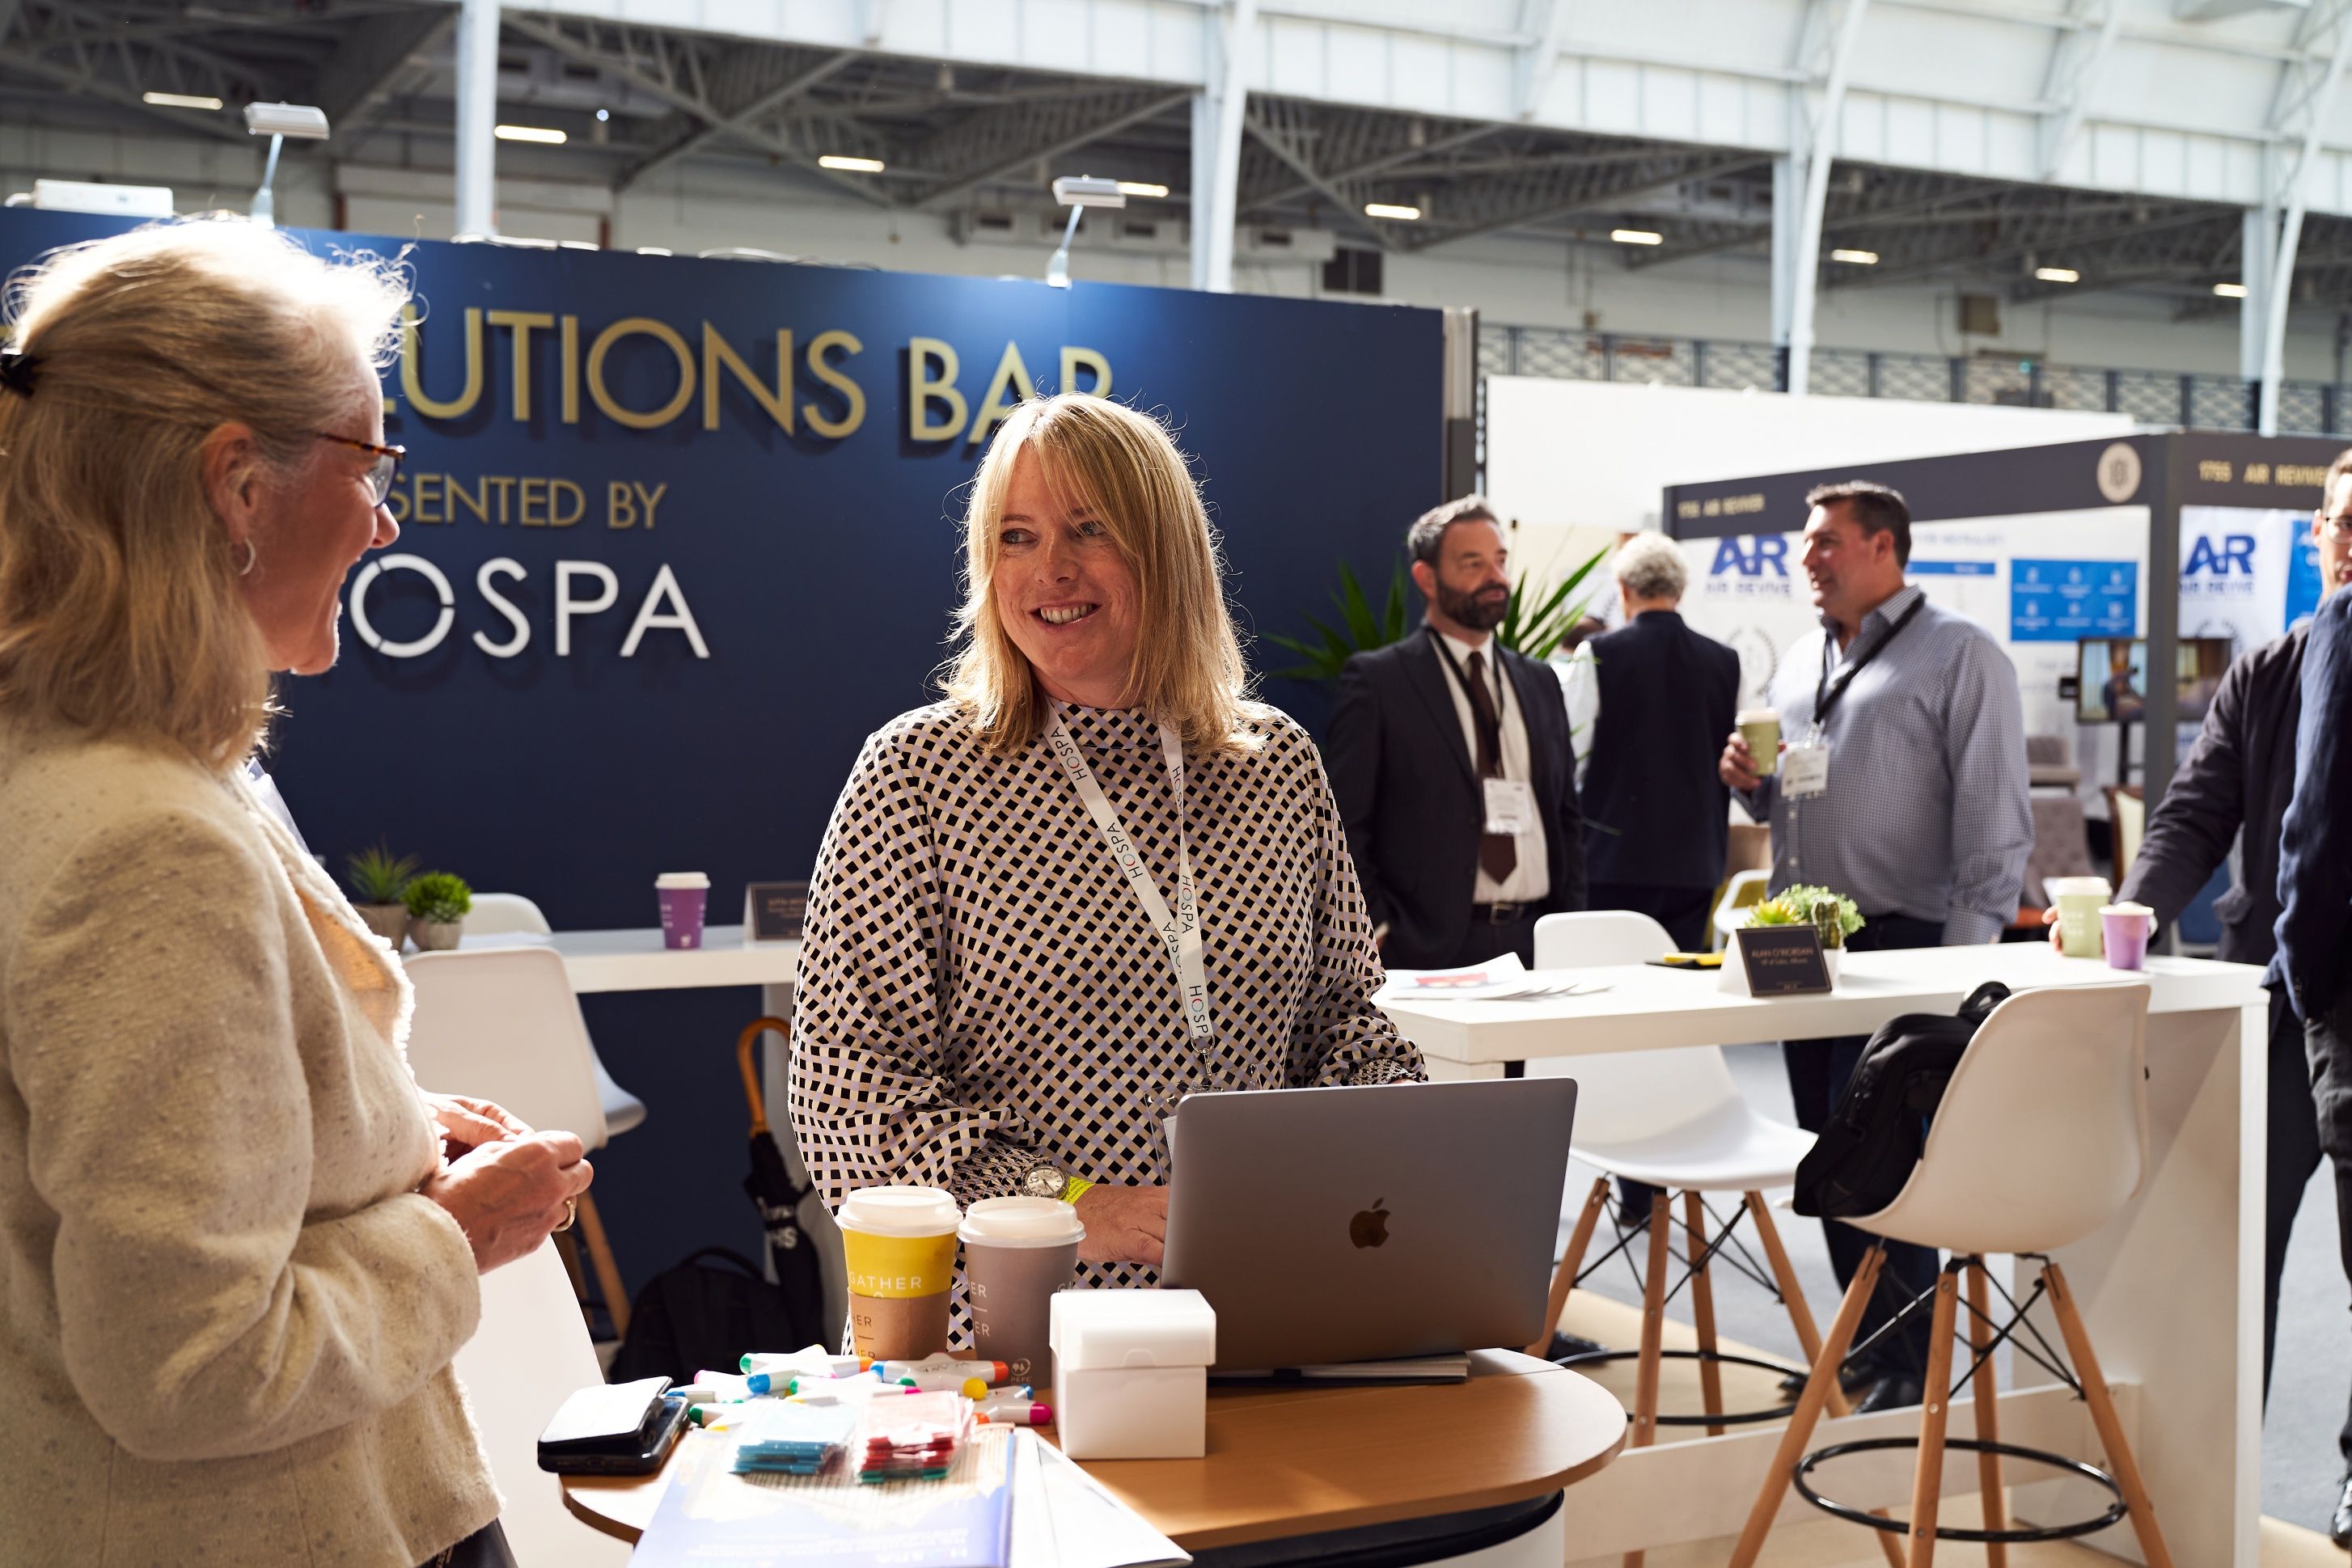 TECH SOLUTIONS BAR PRESENTED BY HOSPA